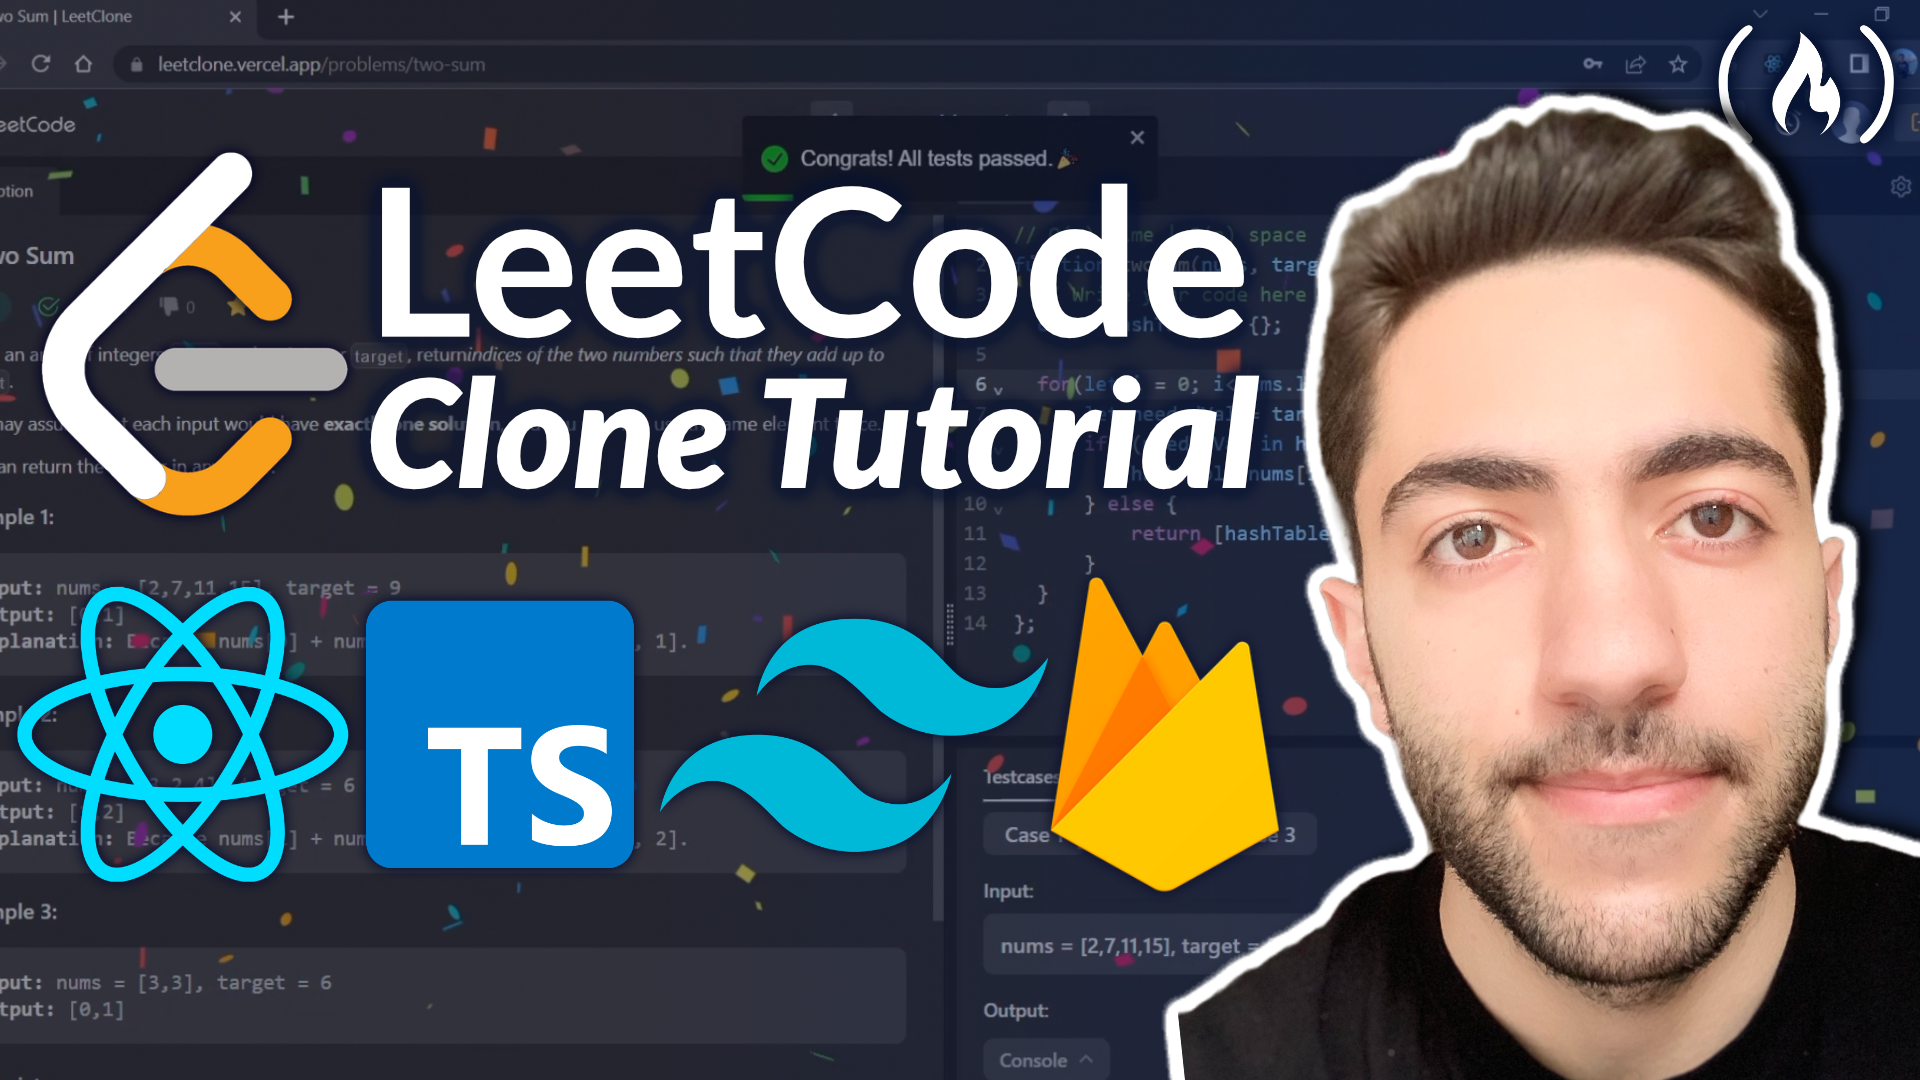 Build and Deploy a LeetCode Clone with React, Next JS, TypeScript, Tailwind CSS, Firebase